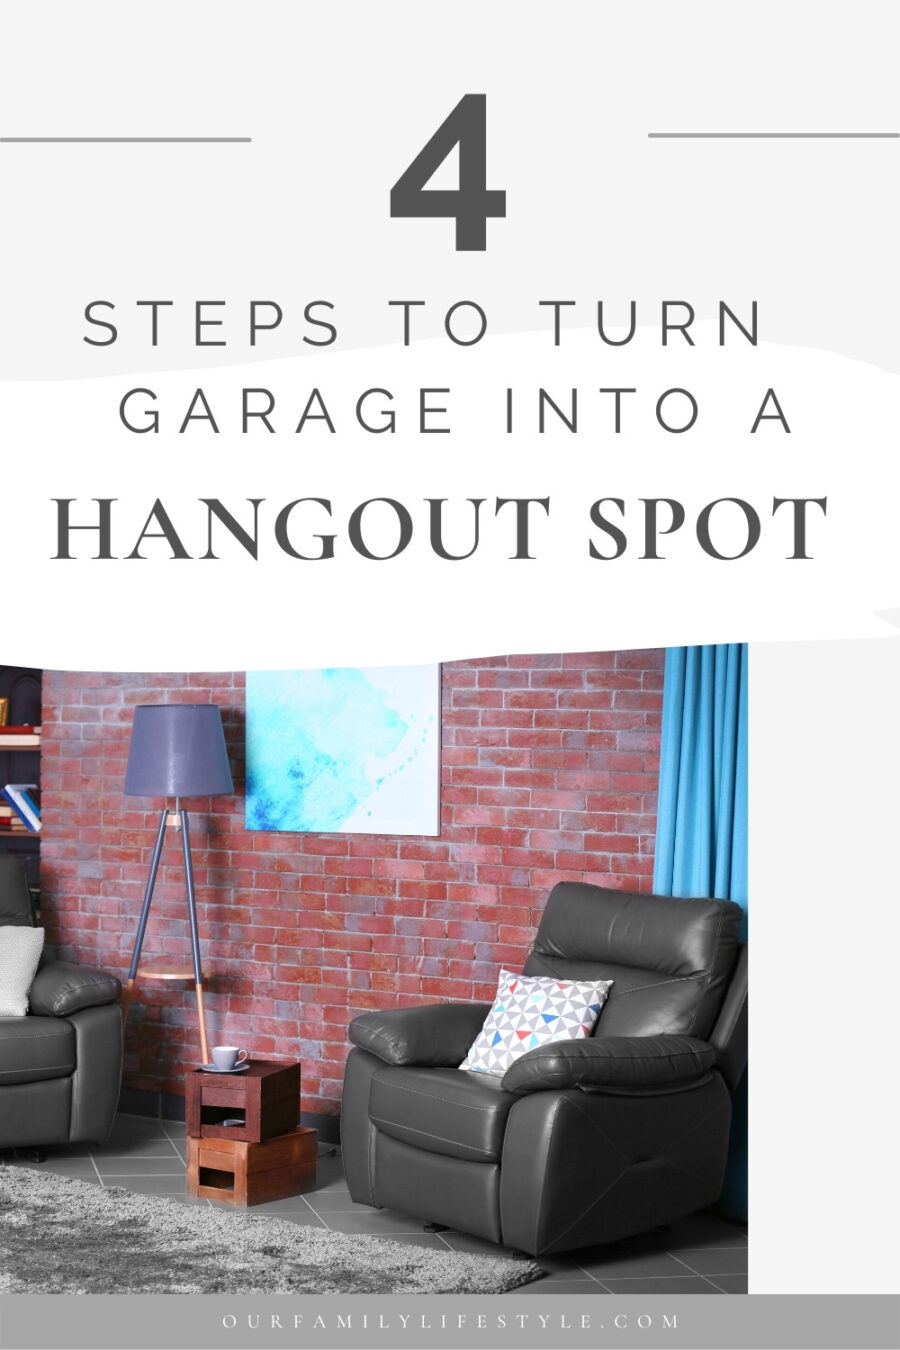 A Helpful Guide To Turning Your Garage Into a Safe and Cozy Hangout Spot